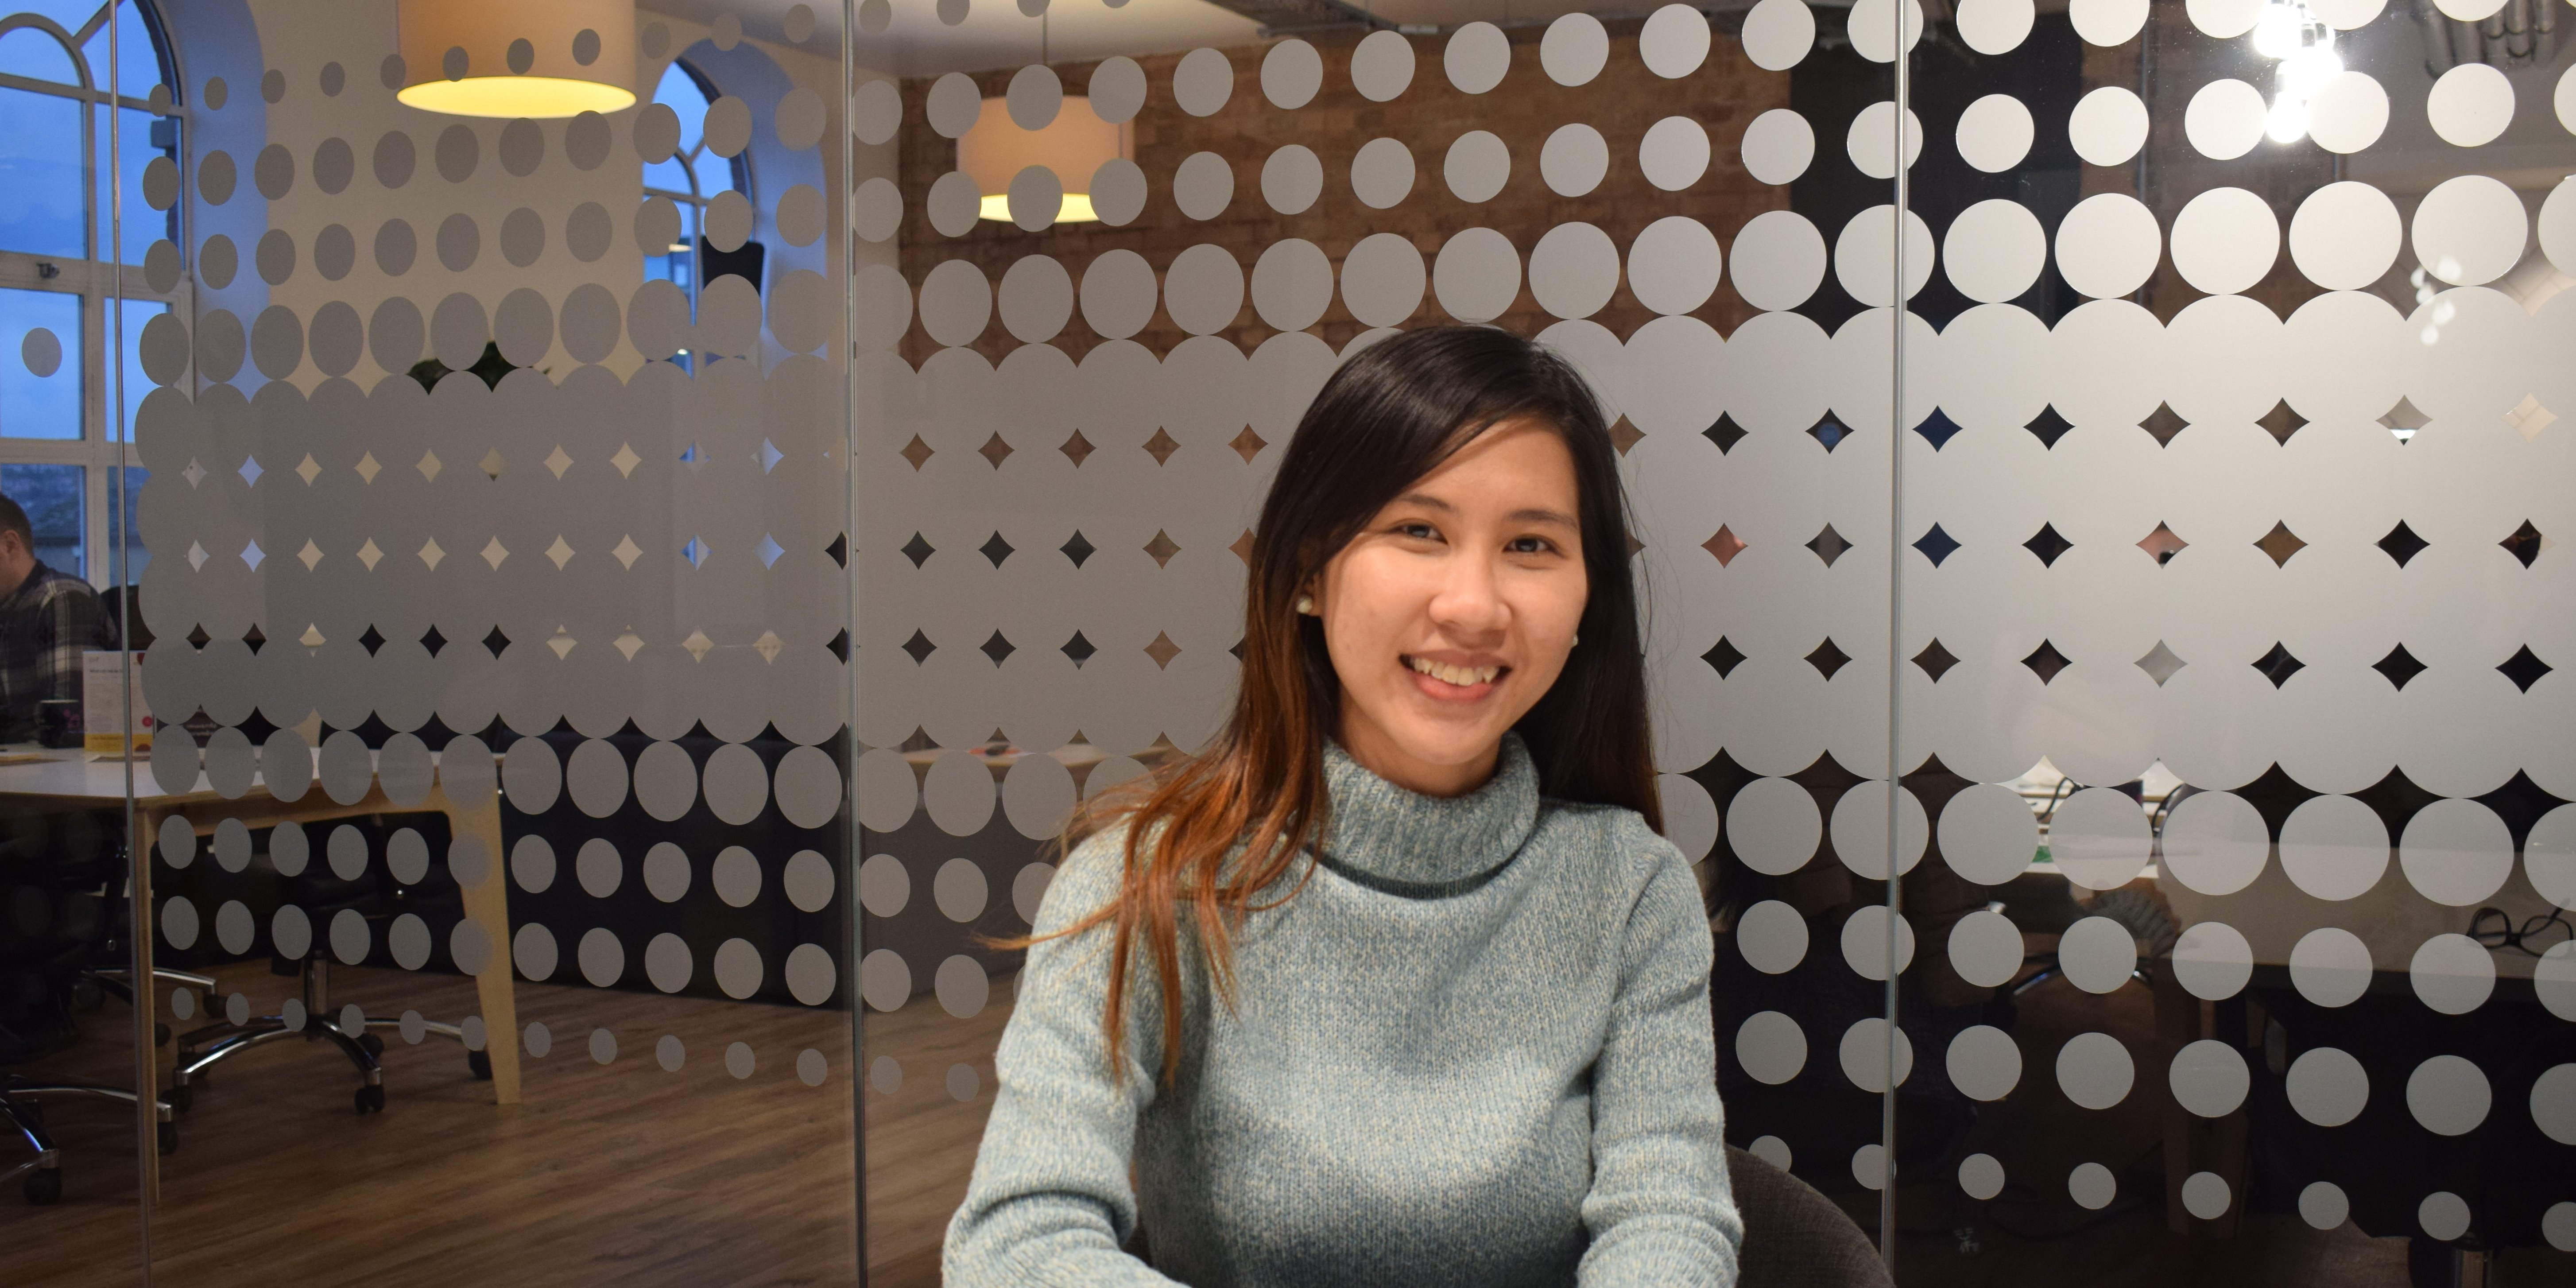 Meet our New Project Co-ordinator Rose Tran